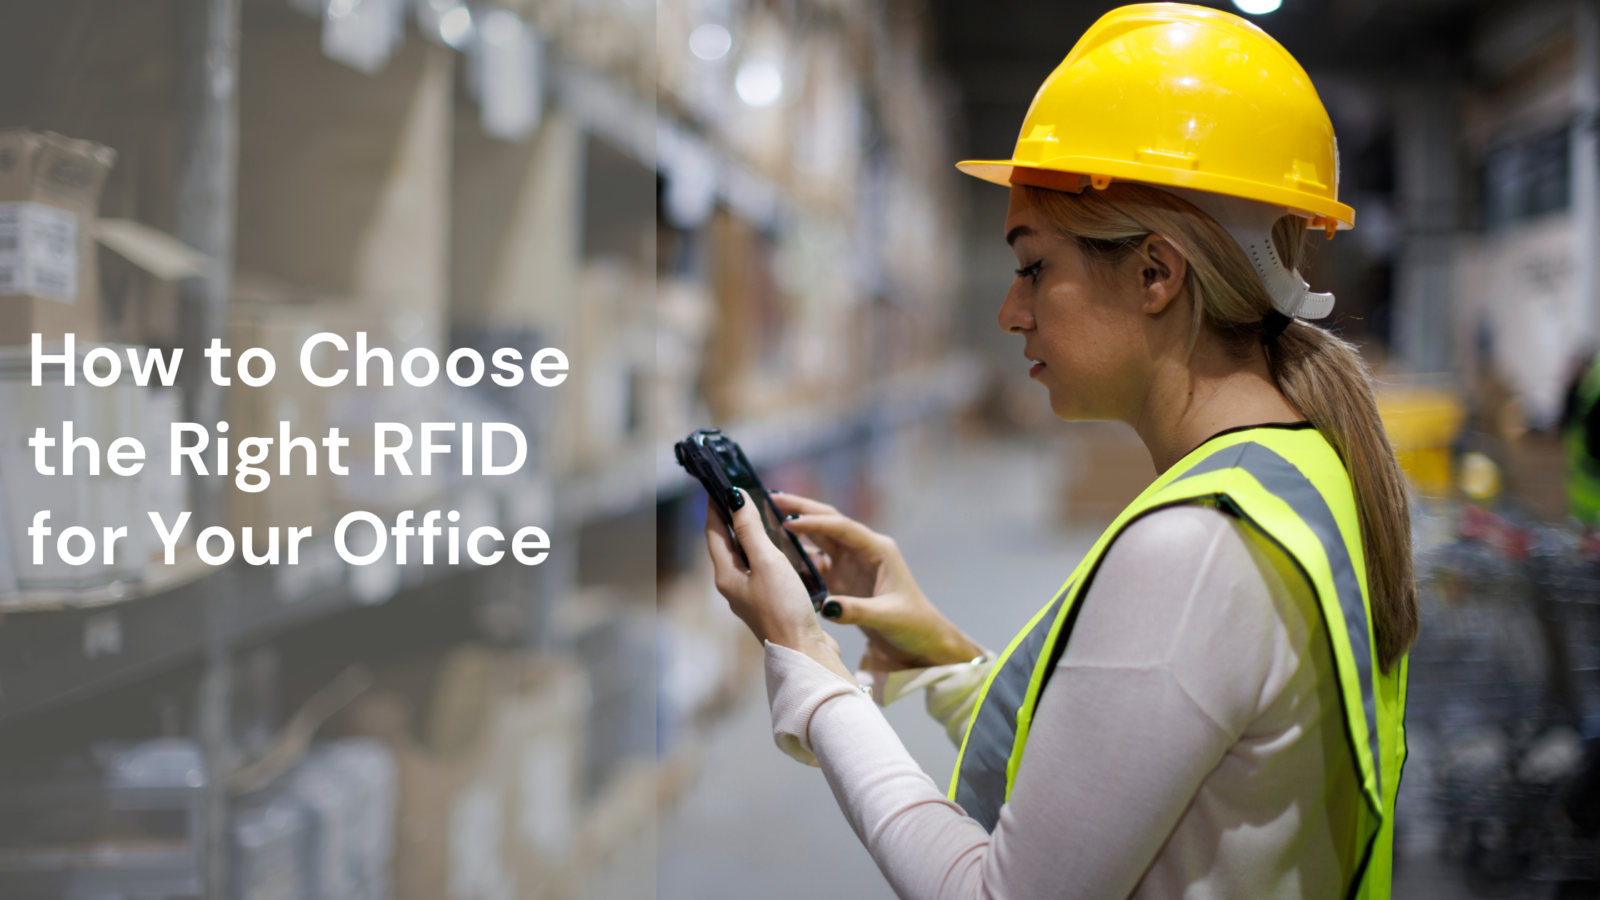 How to Choose the Right RFID for Your Office